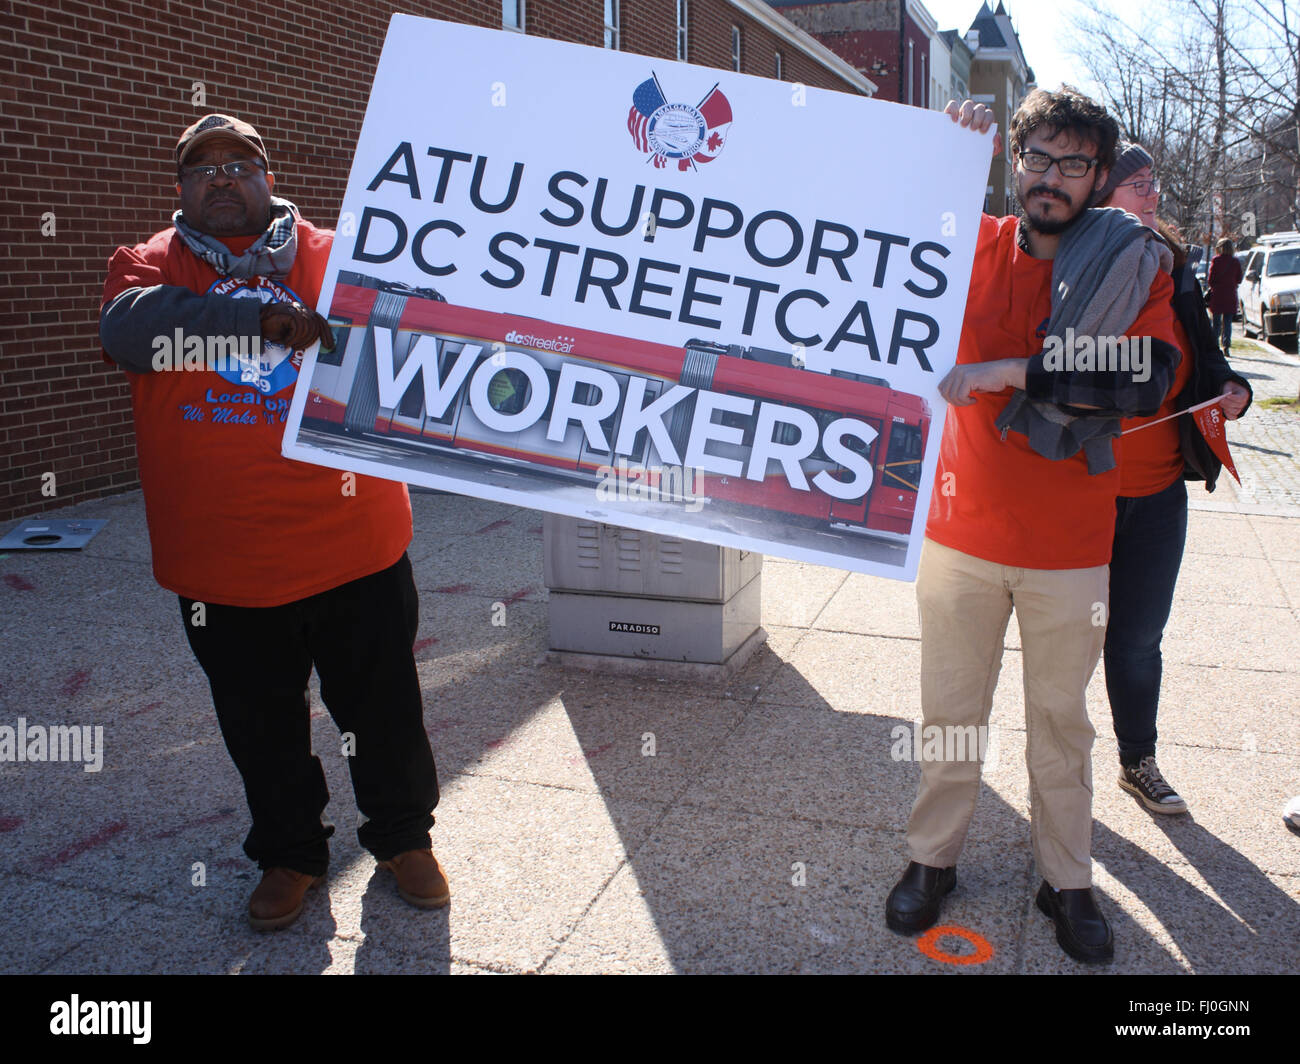 Washington, District of Columbia, USA. 27th Feb, 2016. Two people holding a sign that reads, ''ATU Supports DC Streetcar Workers'' (part of a larger group standing across H Street from the ceremony celebrating the launch of the DC Streetcar). Based on the logo on the shirts being worn, ATU appears to stand for ''Amalgamated Transit Union'' on this sign. Credit:  Evan Golub/ZUMA Wire/Alamy Live News Stock Photo